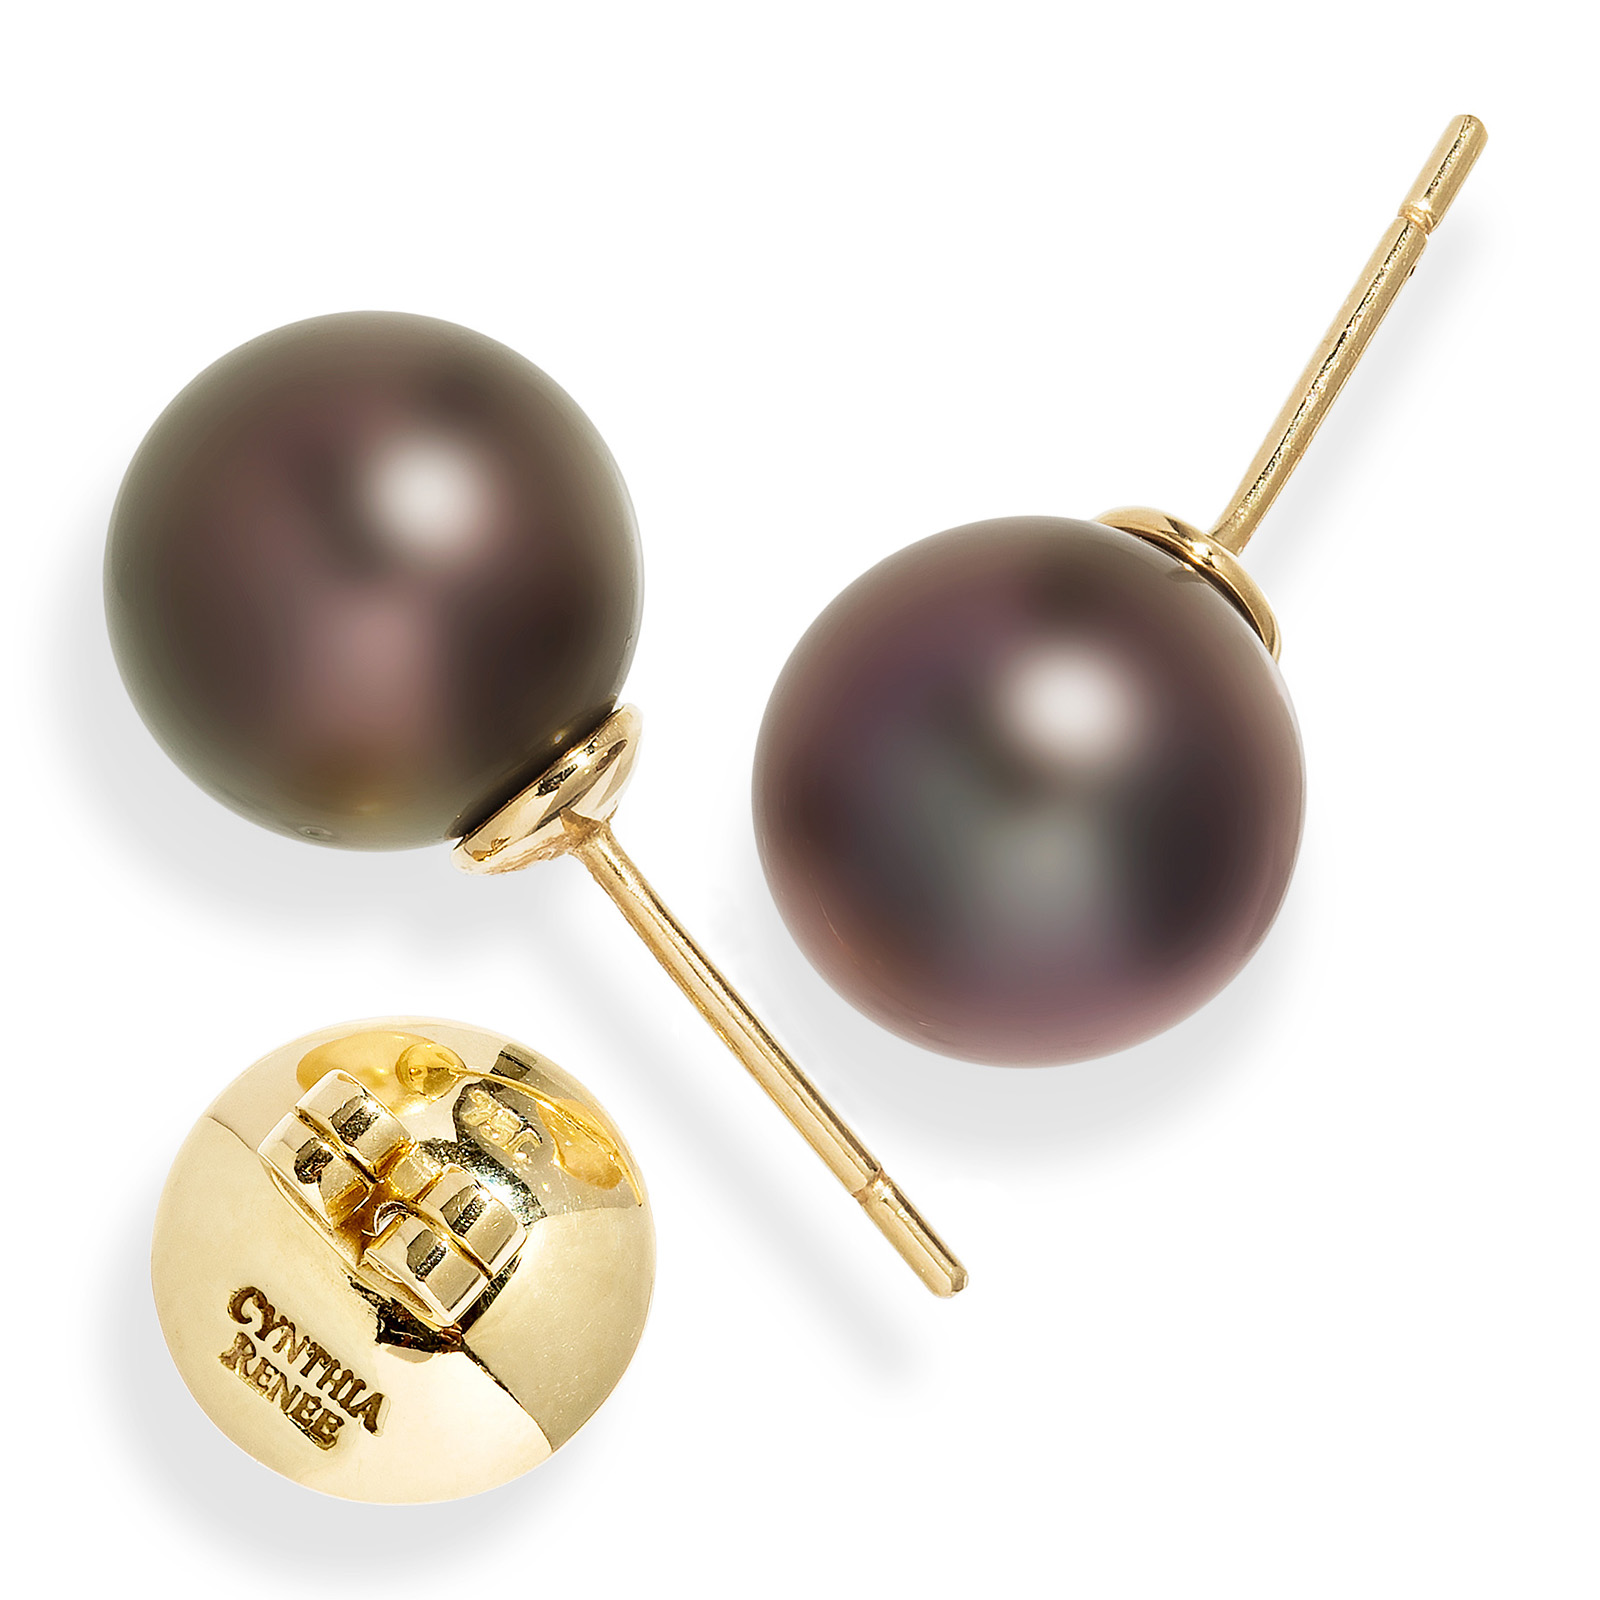 Solid colored spheres earrings in four colors